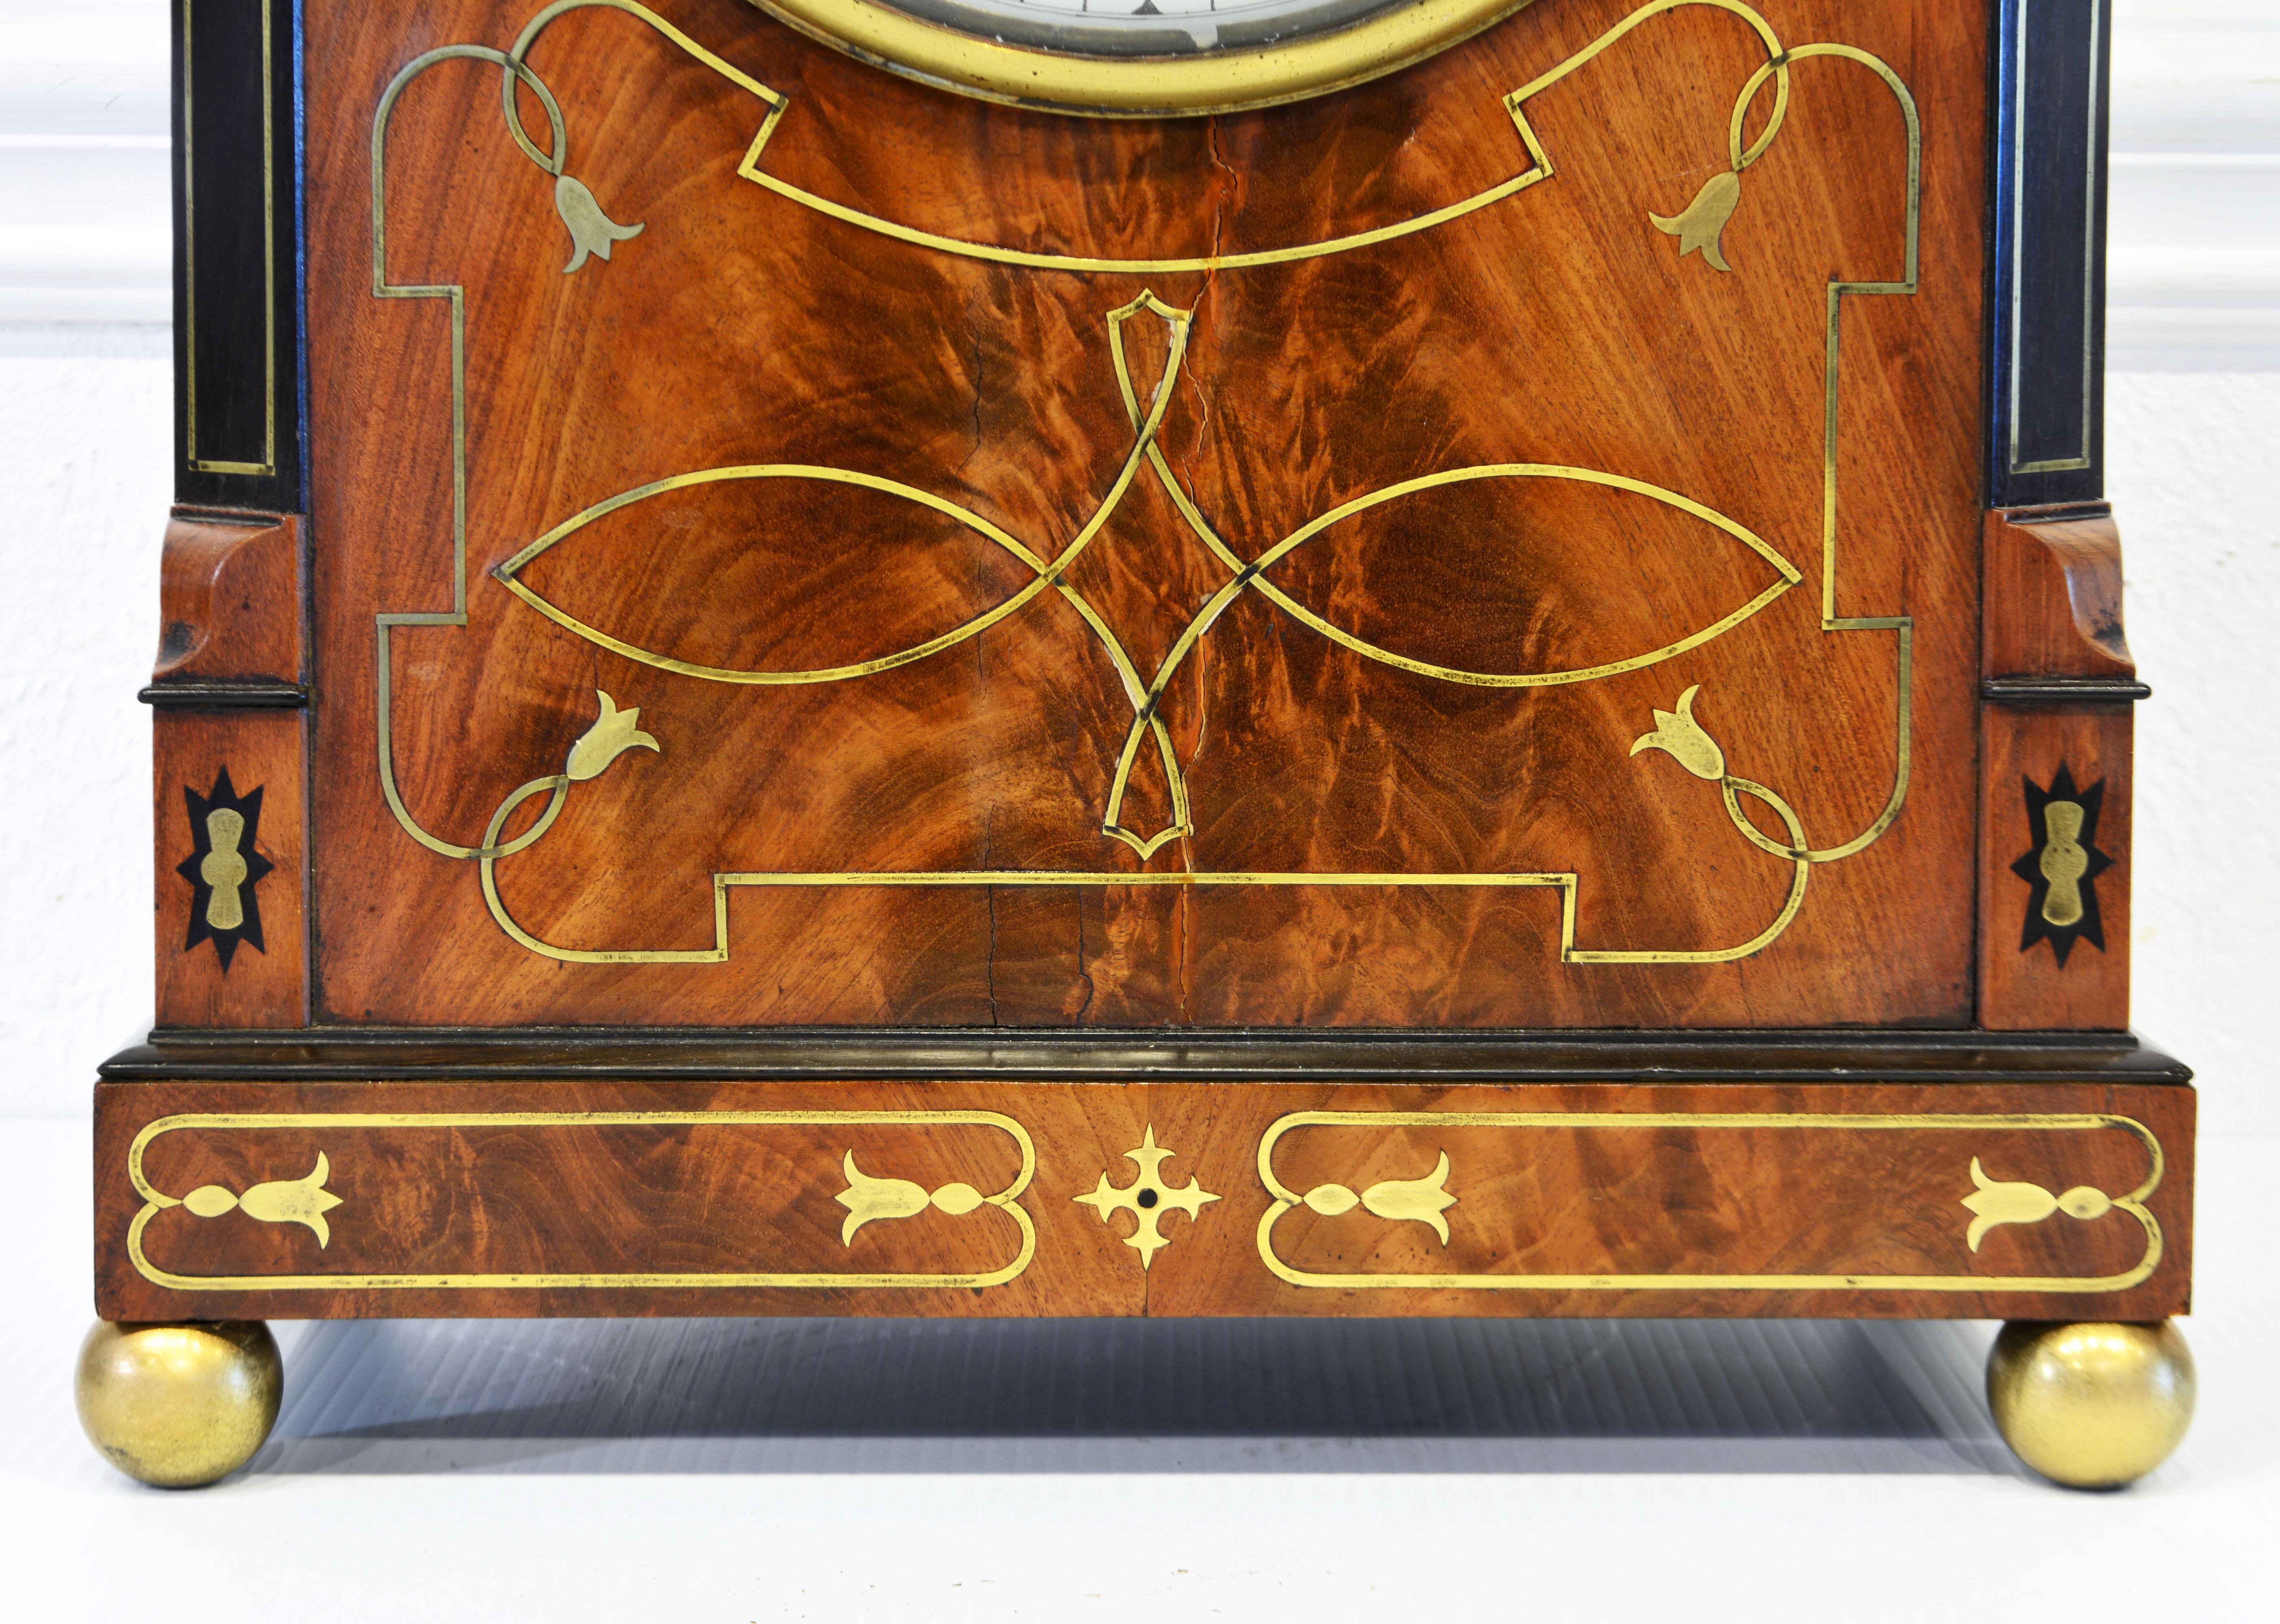 Regency Domed and Brass Inlaid Mantel Clock by Houghton Birmingham, Circa 1830 6